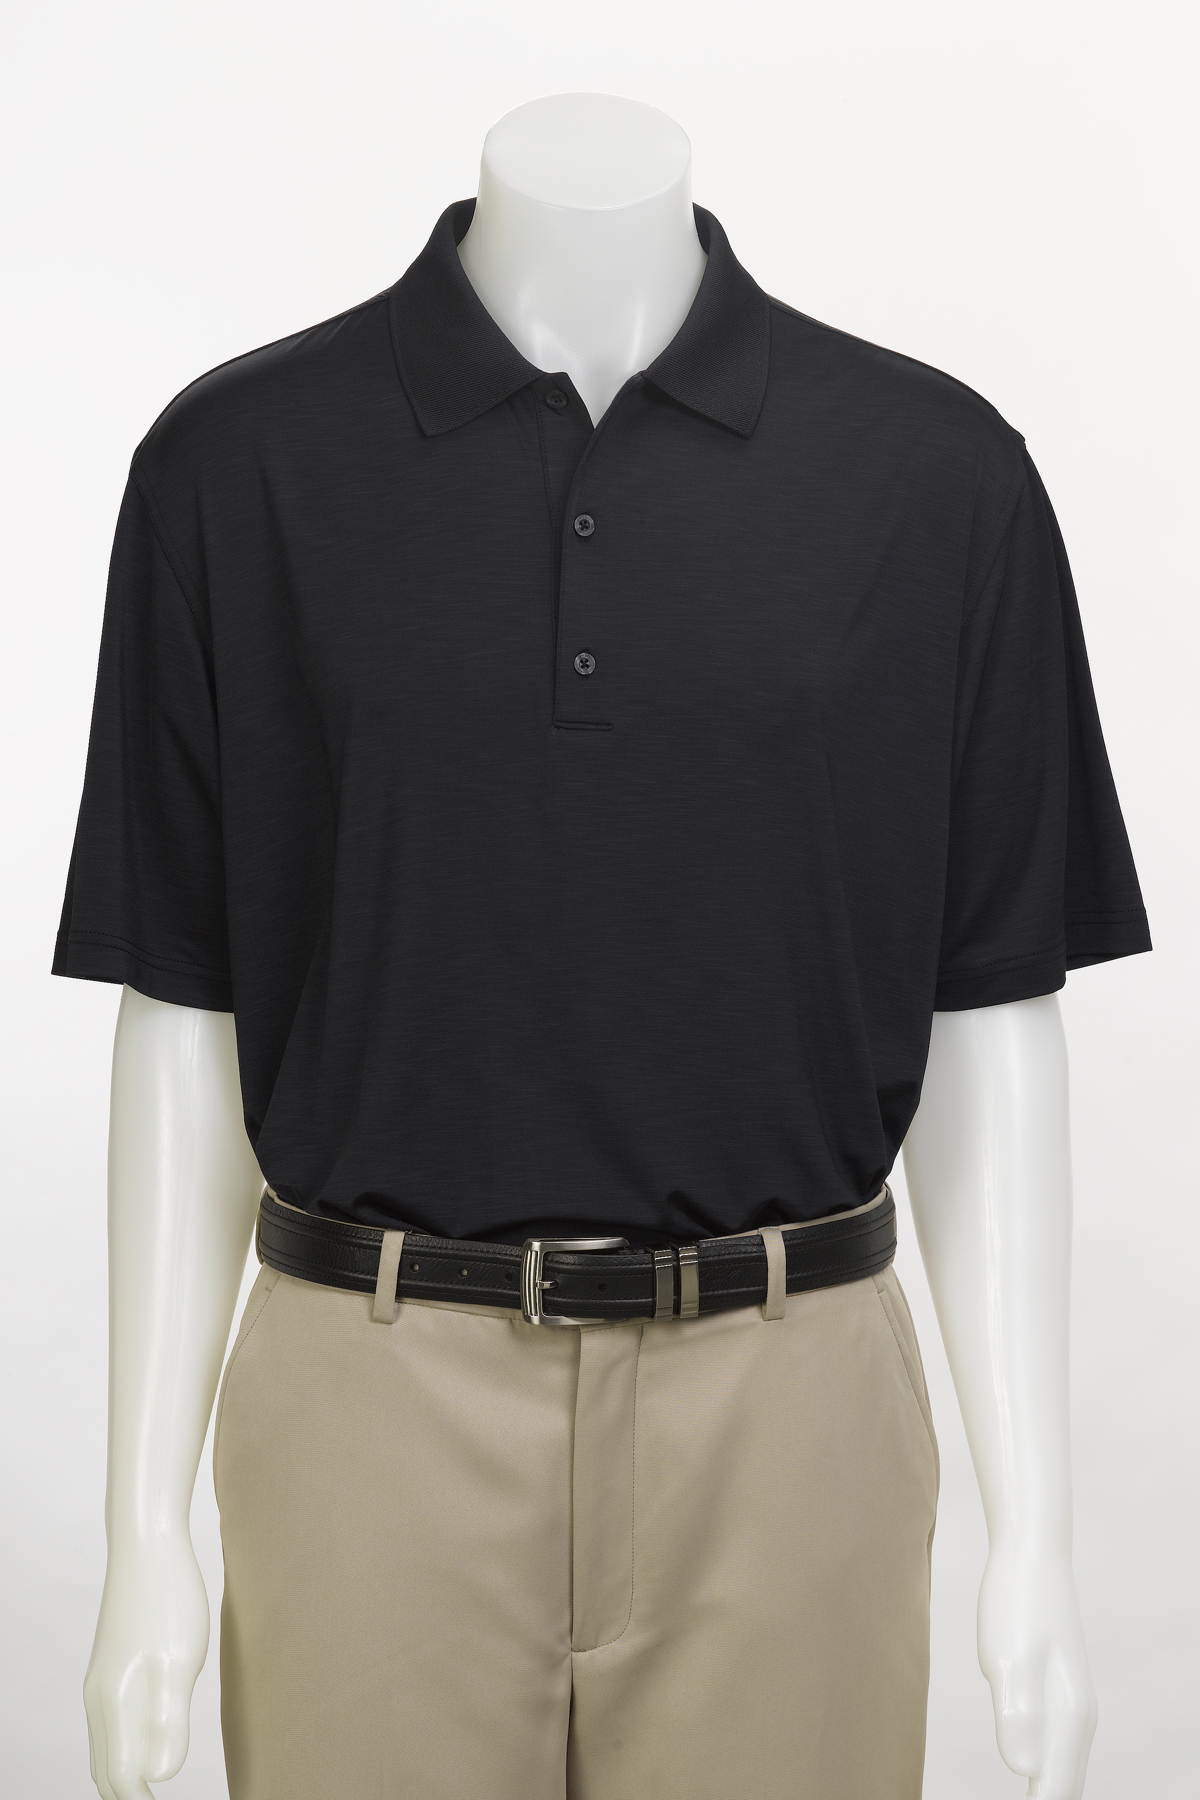 Greg Norman GNS3K430 - Play Dry® Heathered Polo